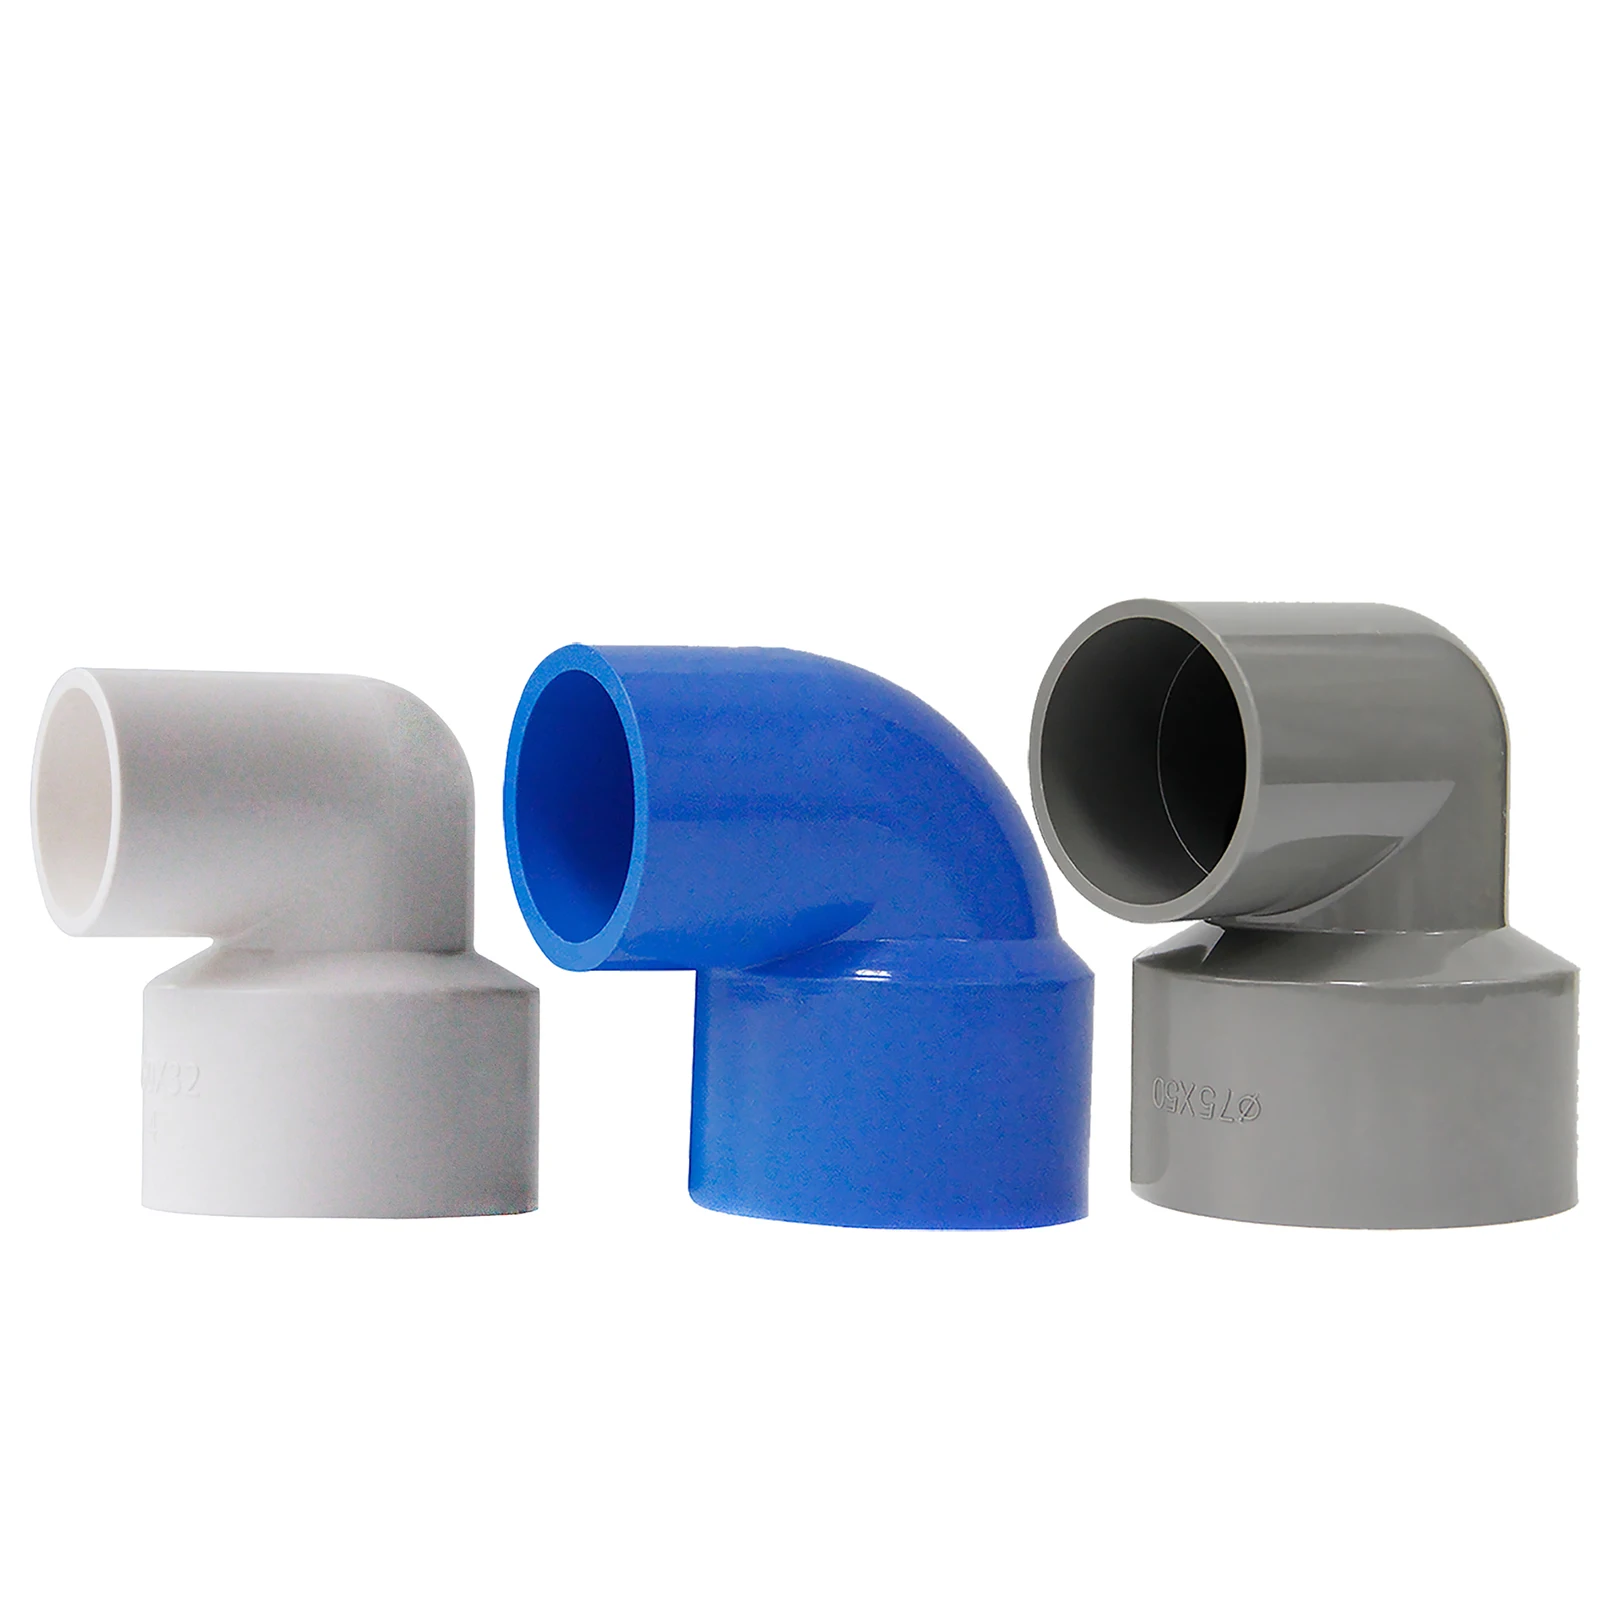 1Pcs PVC 90 Reducing Elbow ID 20,25,32,40,50,63,75,90,110mm Metric Solvent Weld Pipe Fitting Connector Aquarium Pond Garden DIY fag h306 adapter sleeve metric 25mm id